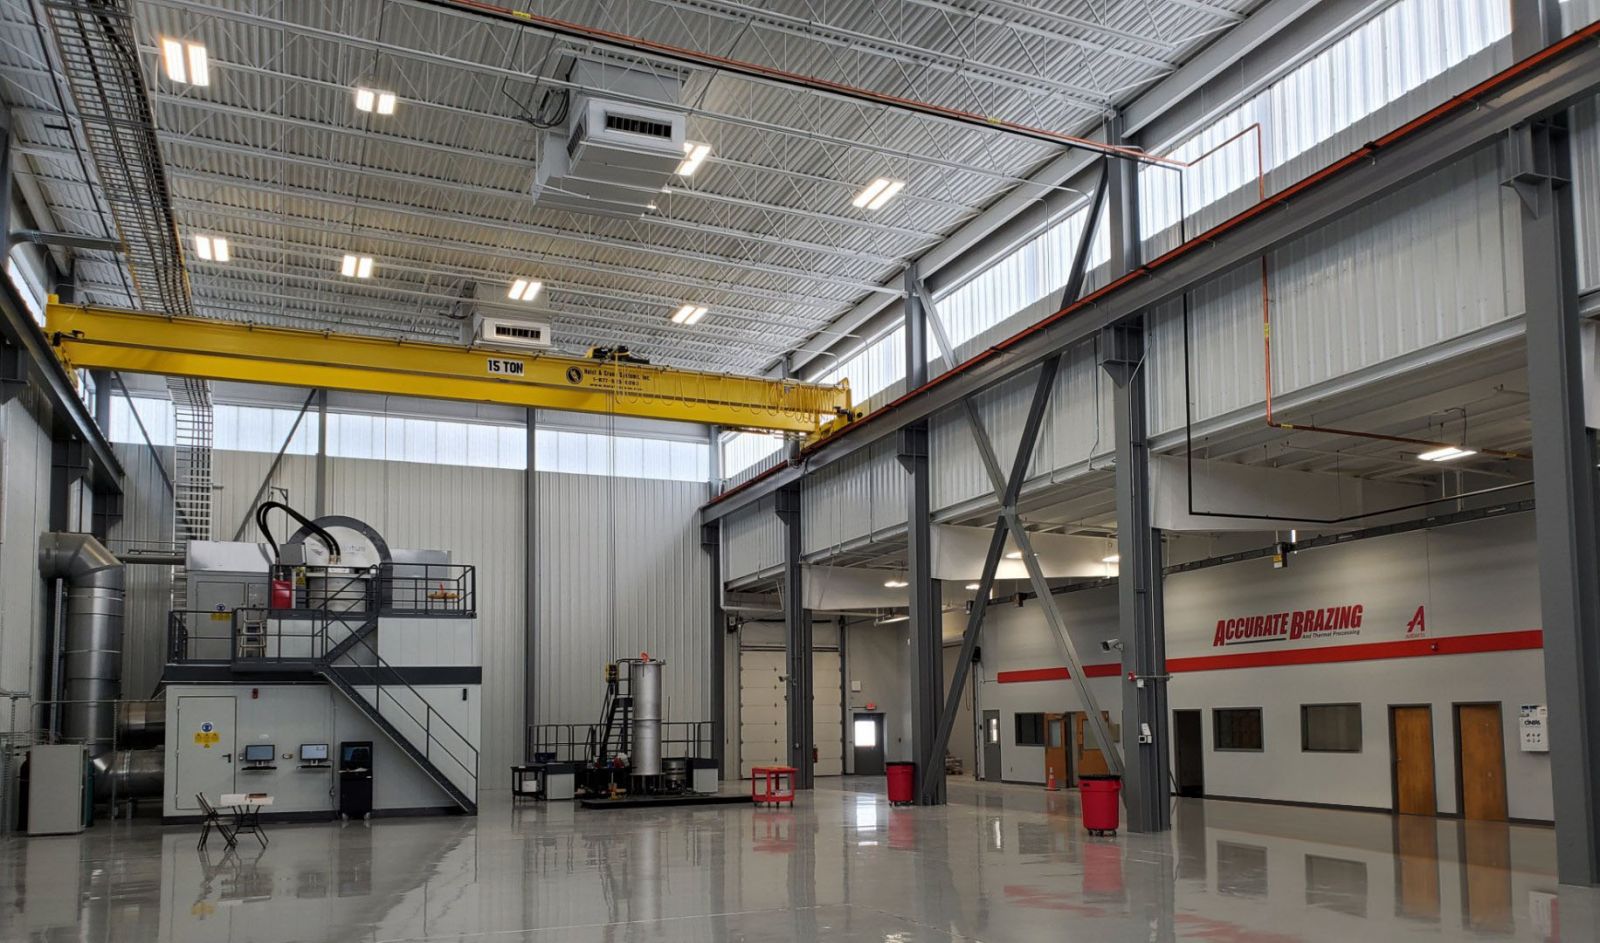 Accurate Brazing's Garlington Road facility was built to house up to three hot isostatic presses. (Photo/Provided)